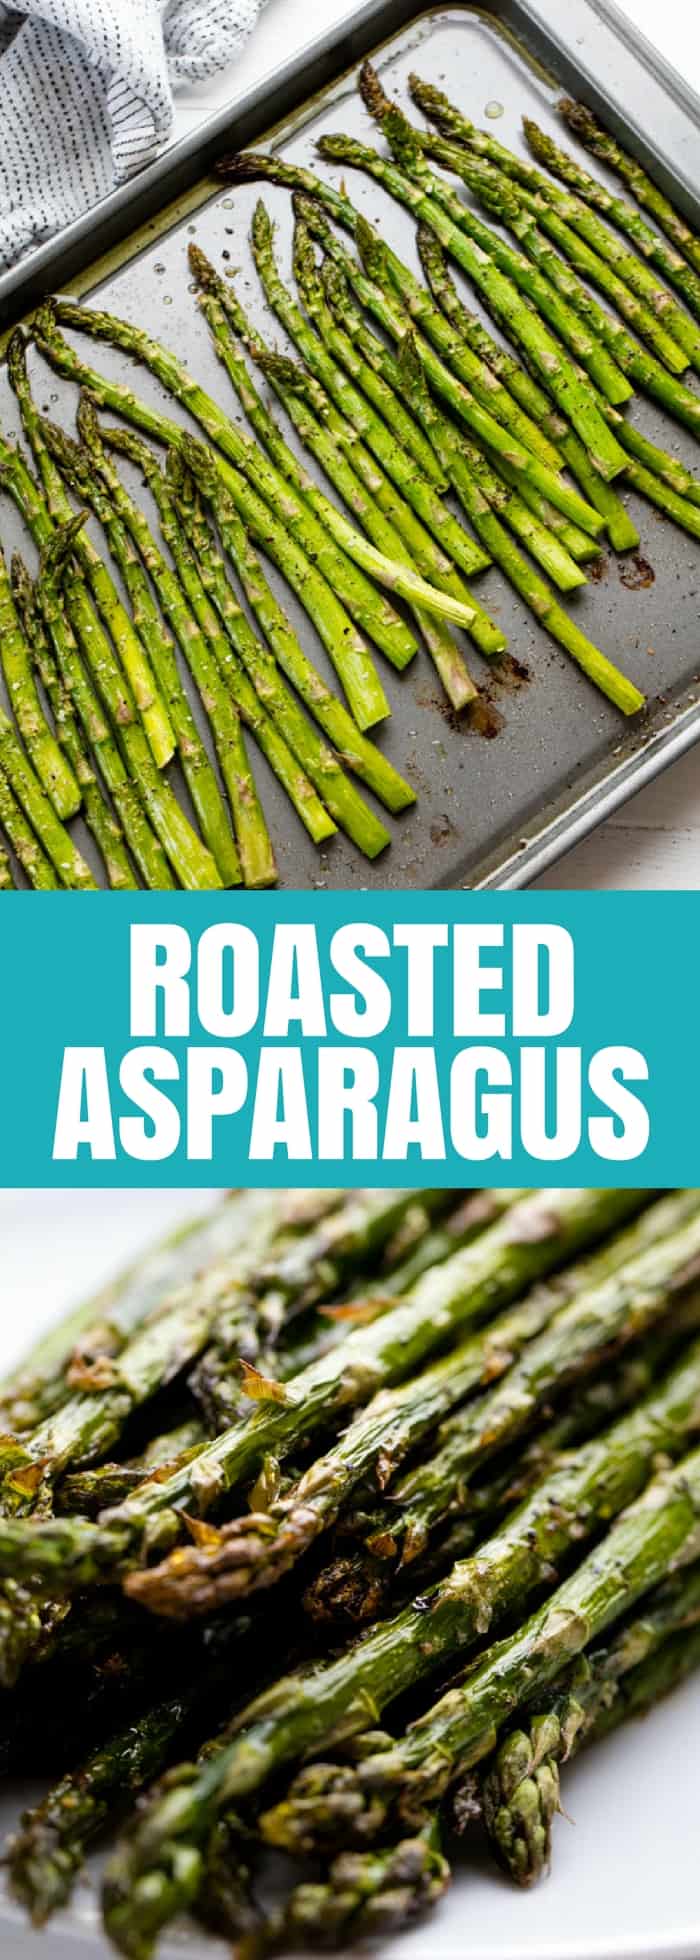 Roasted Asparagus is one of the simplest, most delicious ways to easily cook asparagus in the oven. It requires minimal effort and the result is amazing! 